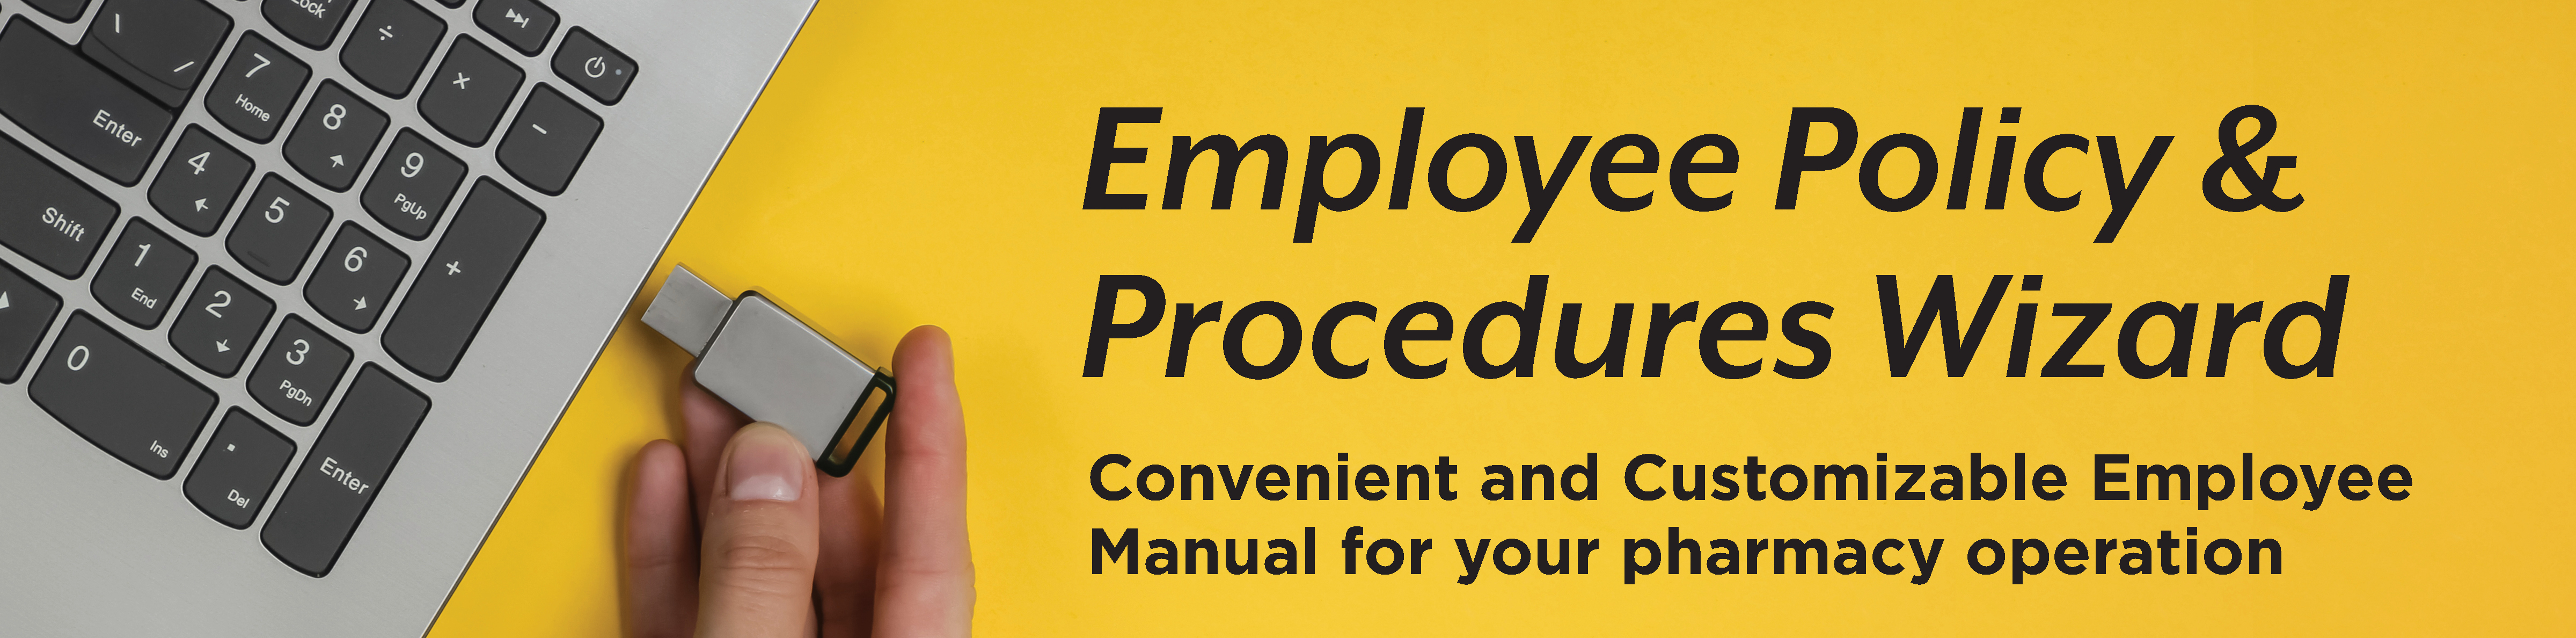 NCPA Employee Policy and Procedures Wizard v5.0